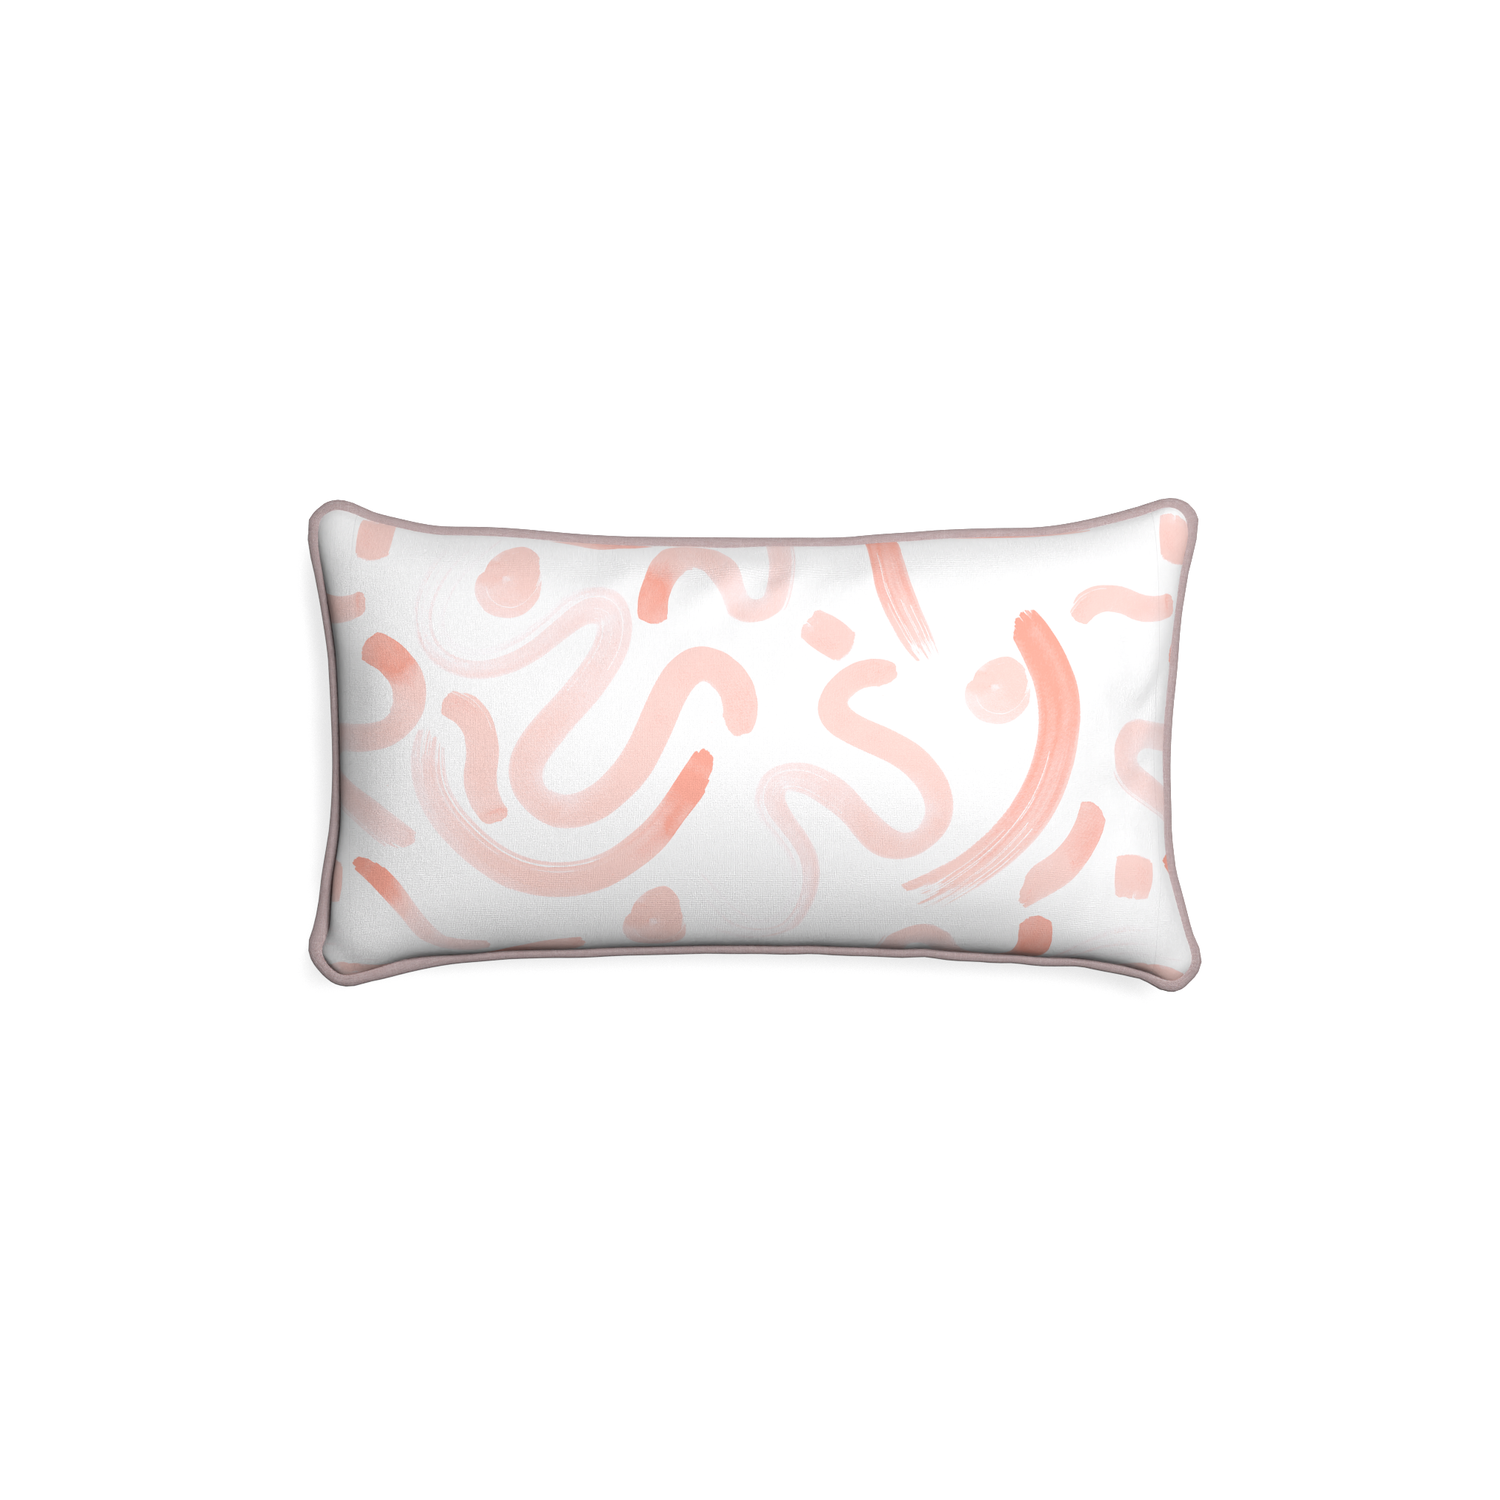 Petite-lumbar hockney pink custom pink graphicpillow with orchid piping on white background